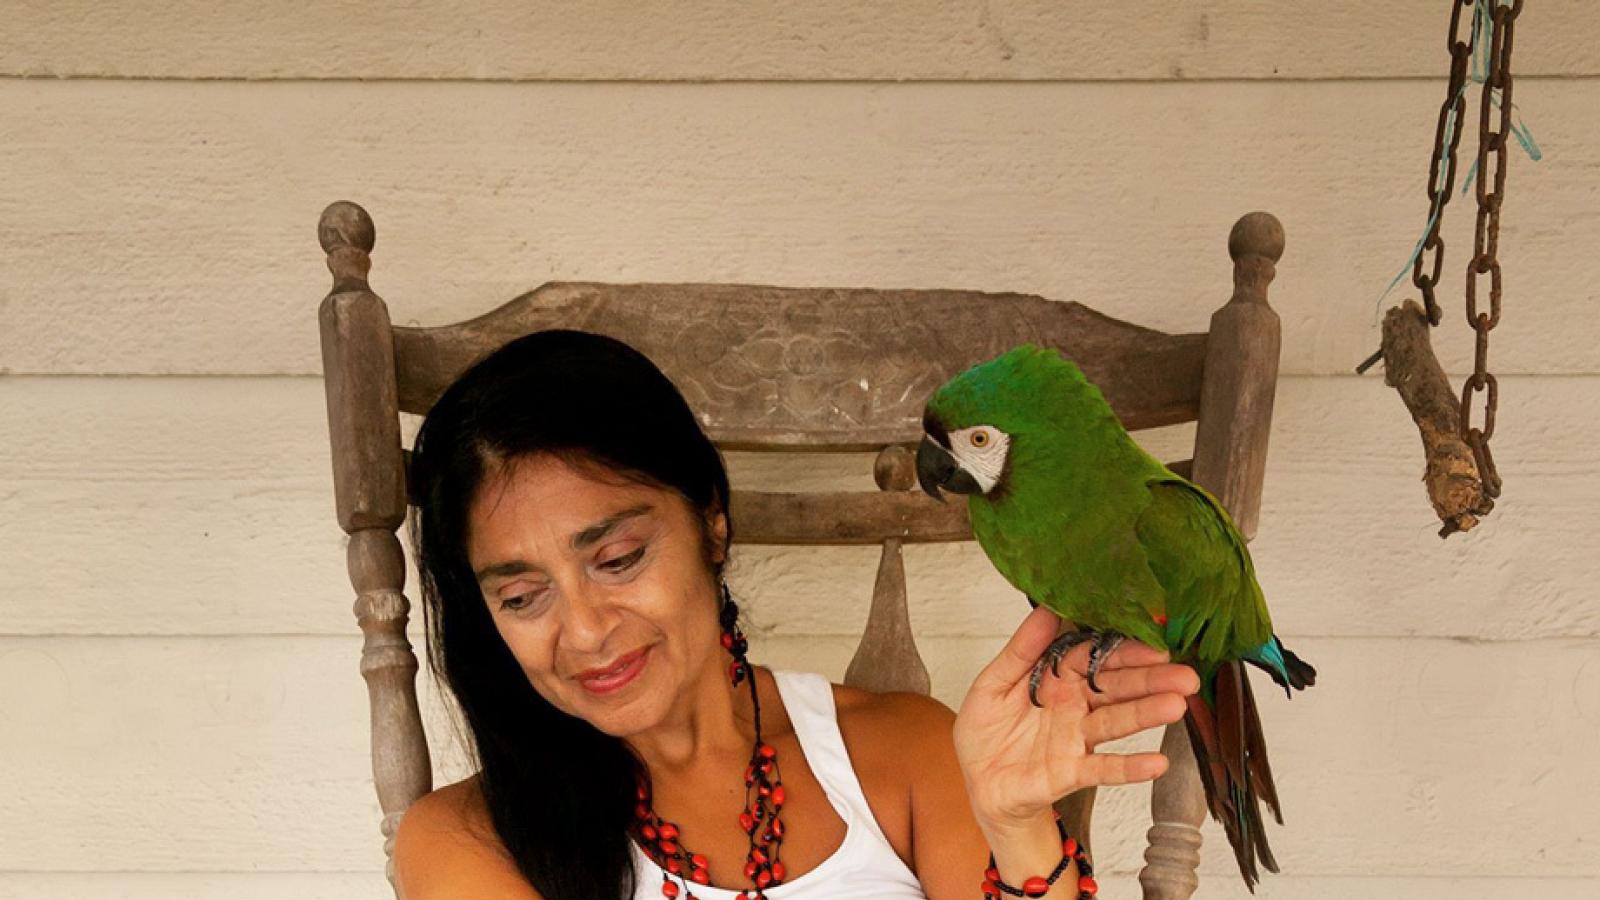 Woman sitting on a bench with parrot on her hand